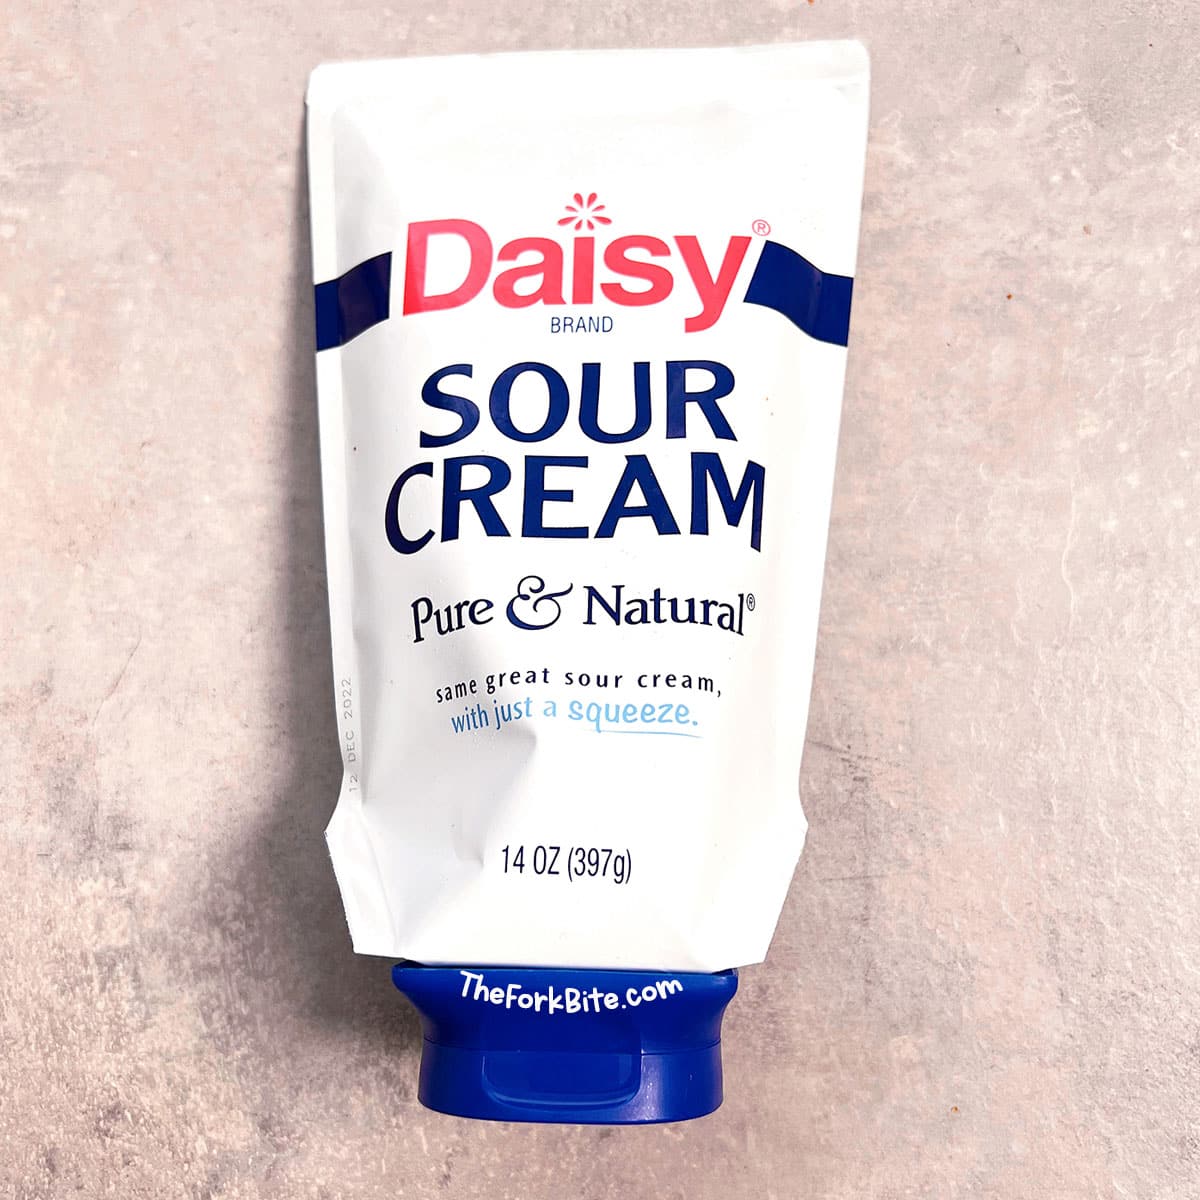 Sour cream provides a richness and depth of flavor that milk can't offer, making for an even more delicious meal.